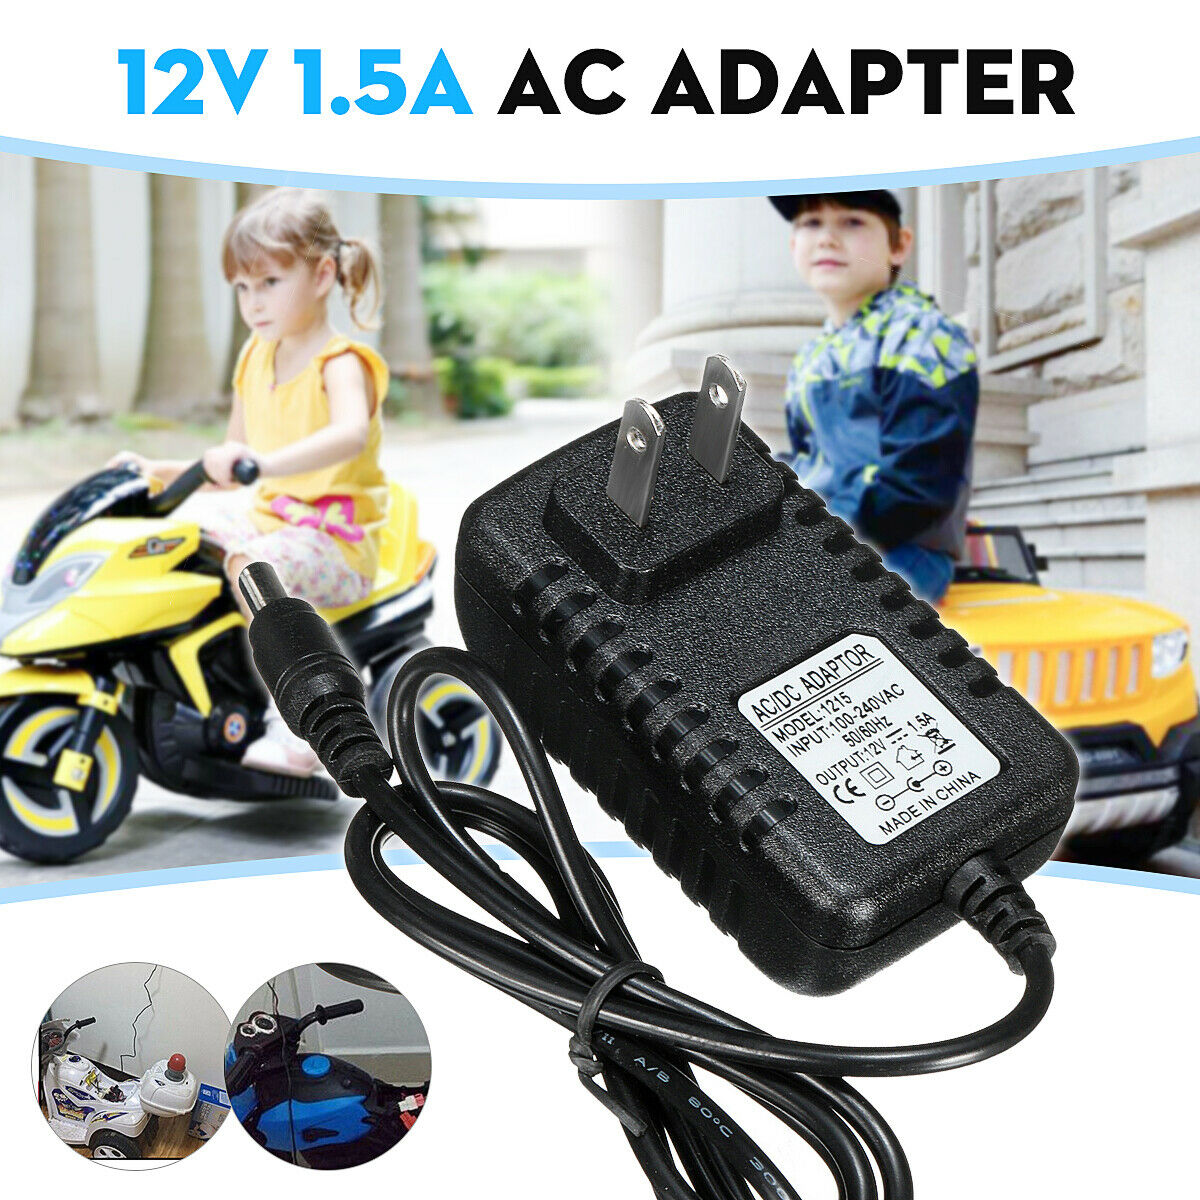 12V 1A Battery Charger Adapter For Kids ATV Quad Ride On Cars Motorcycle Brand: universal MPN: ME